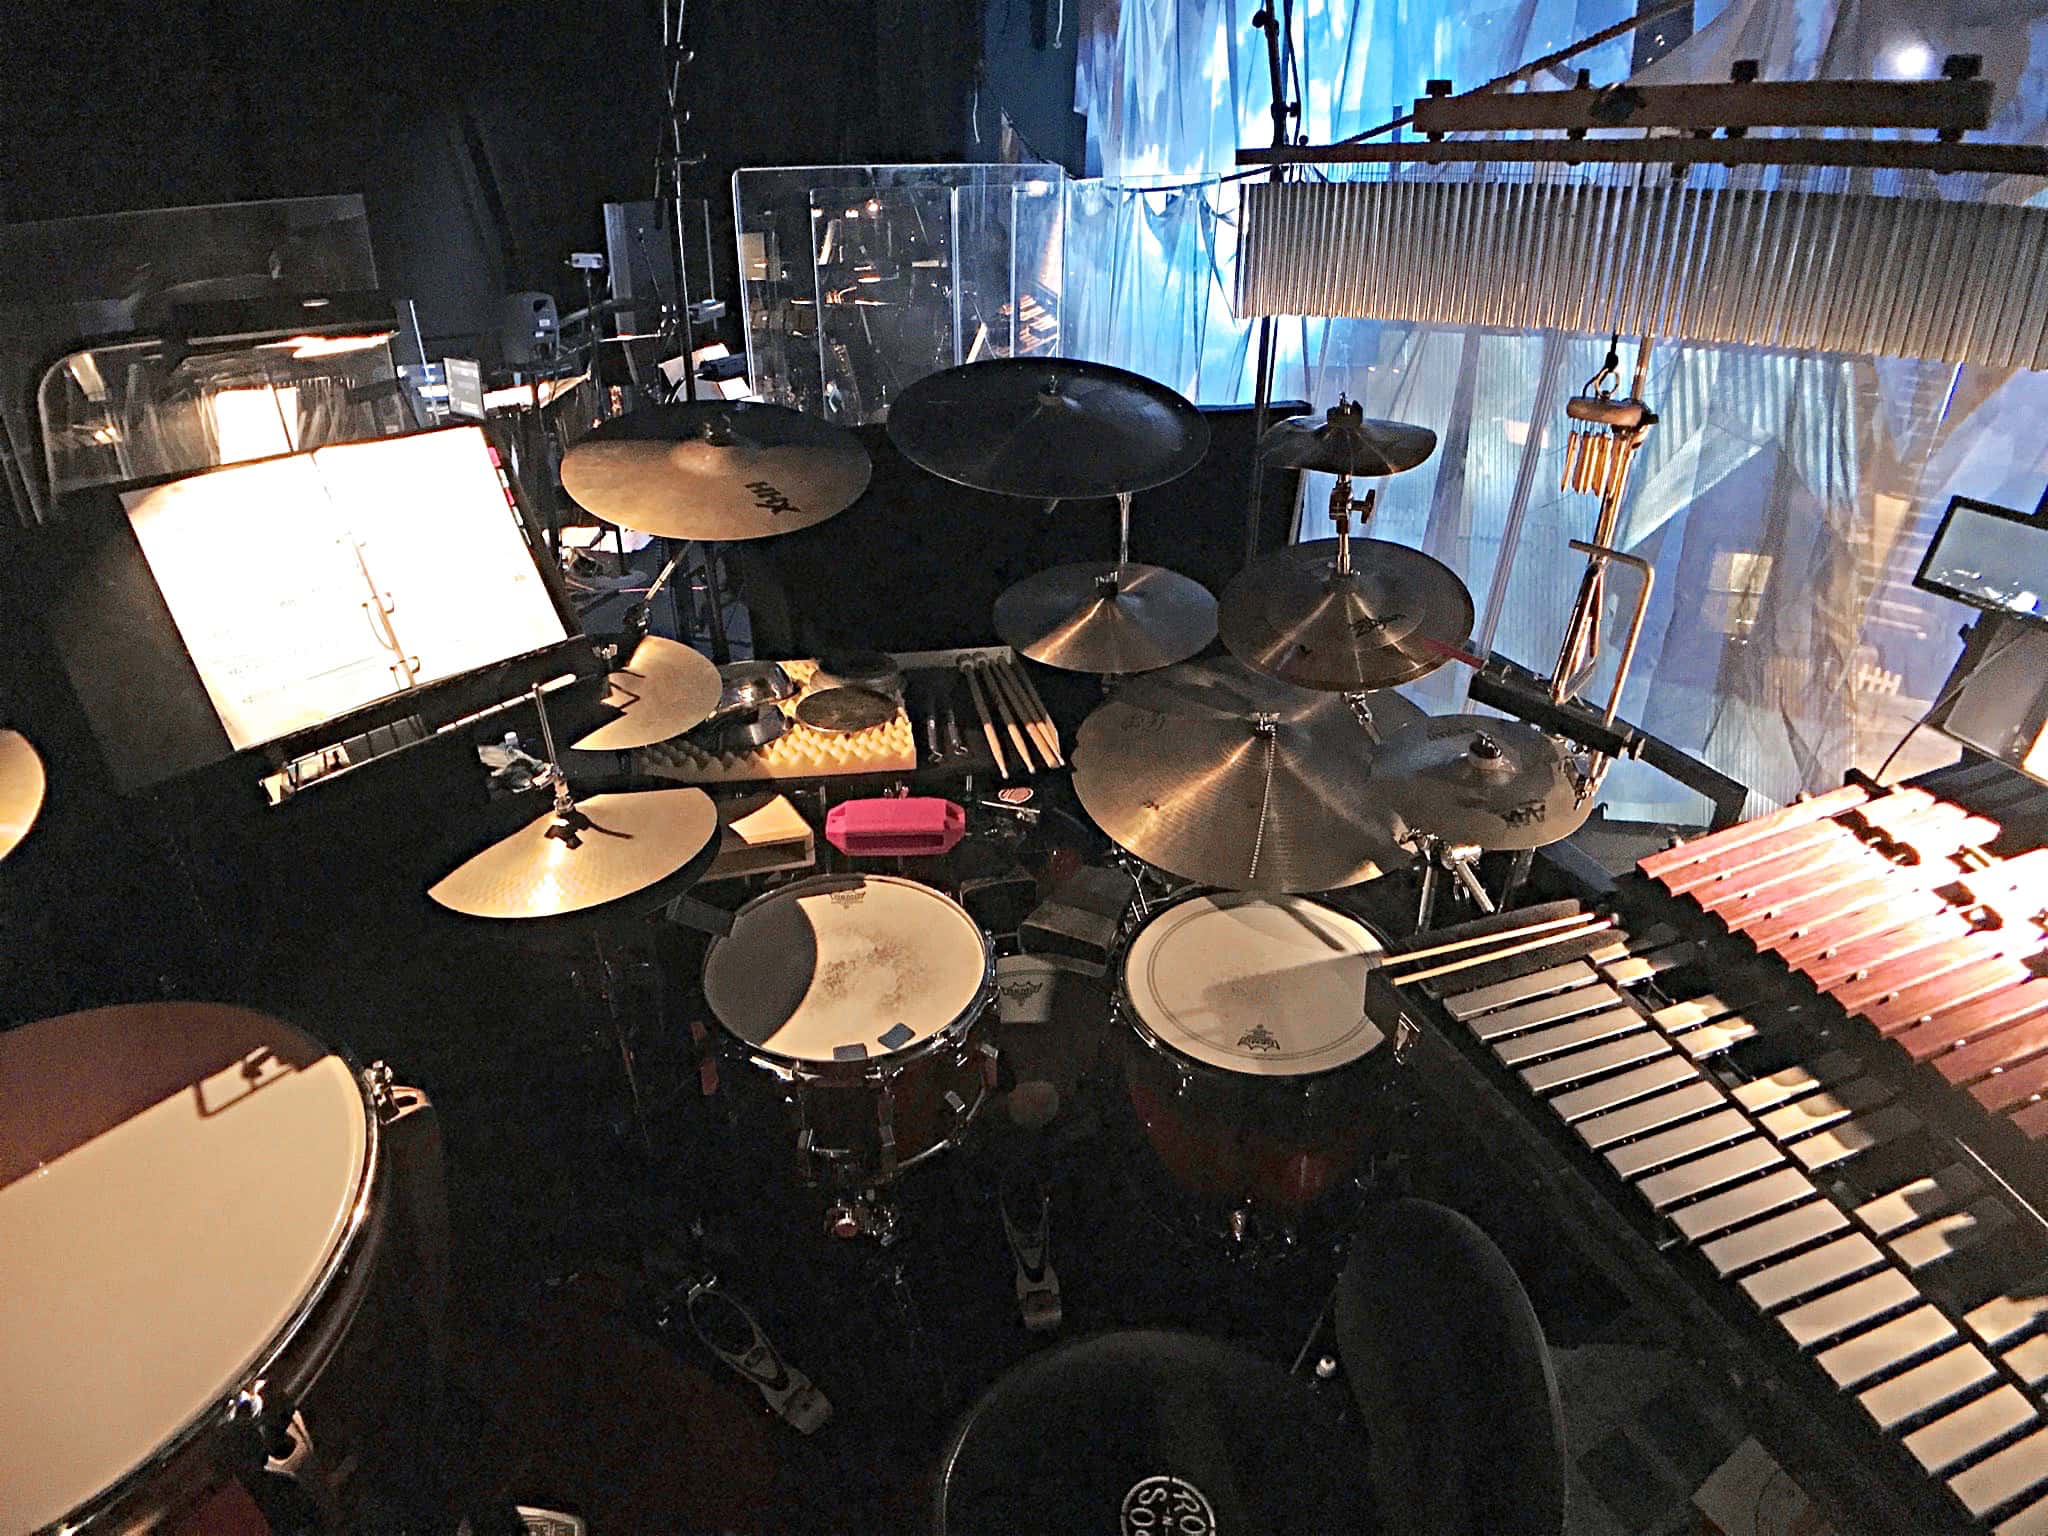 George English’s setup for The Wizard of Oz at the Crucible Theatre in Sheffield, South Yorkshire, England.